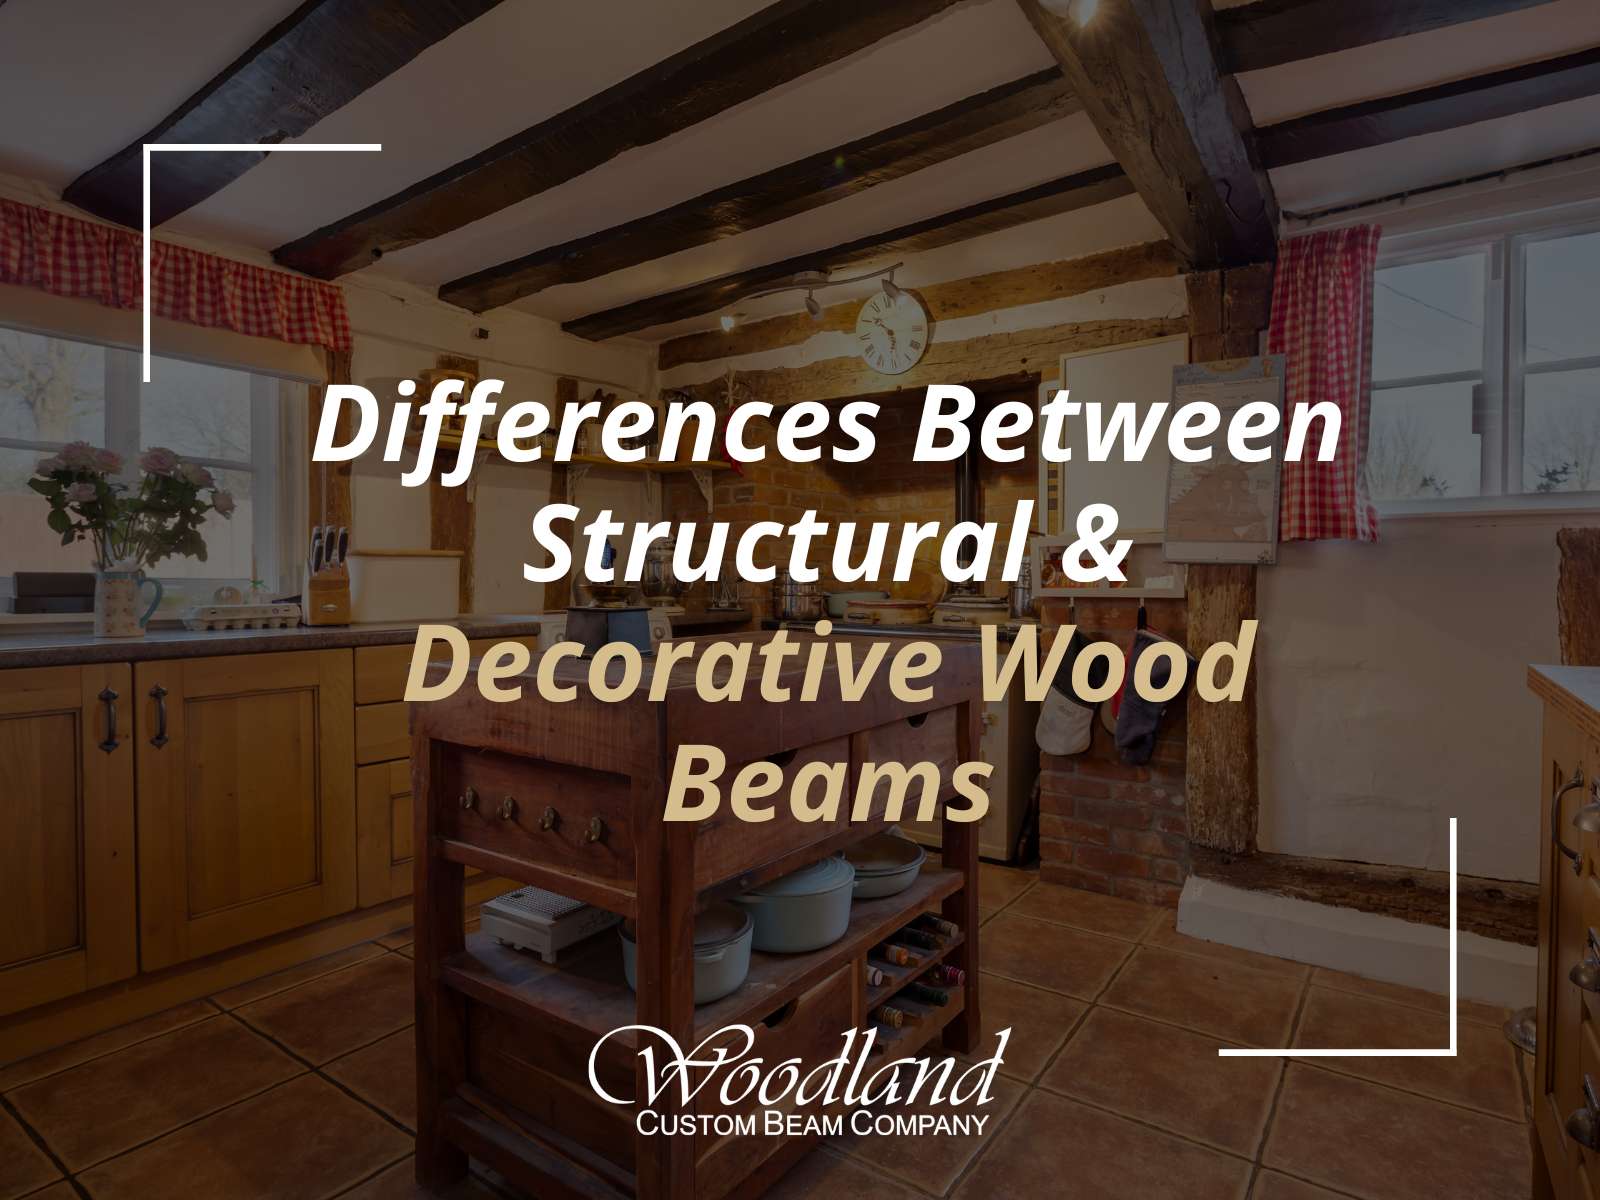 Differences Between Structural & Decorative Wood Beams